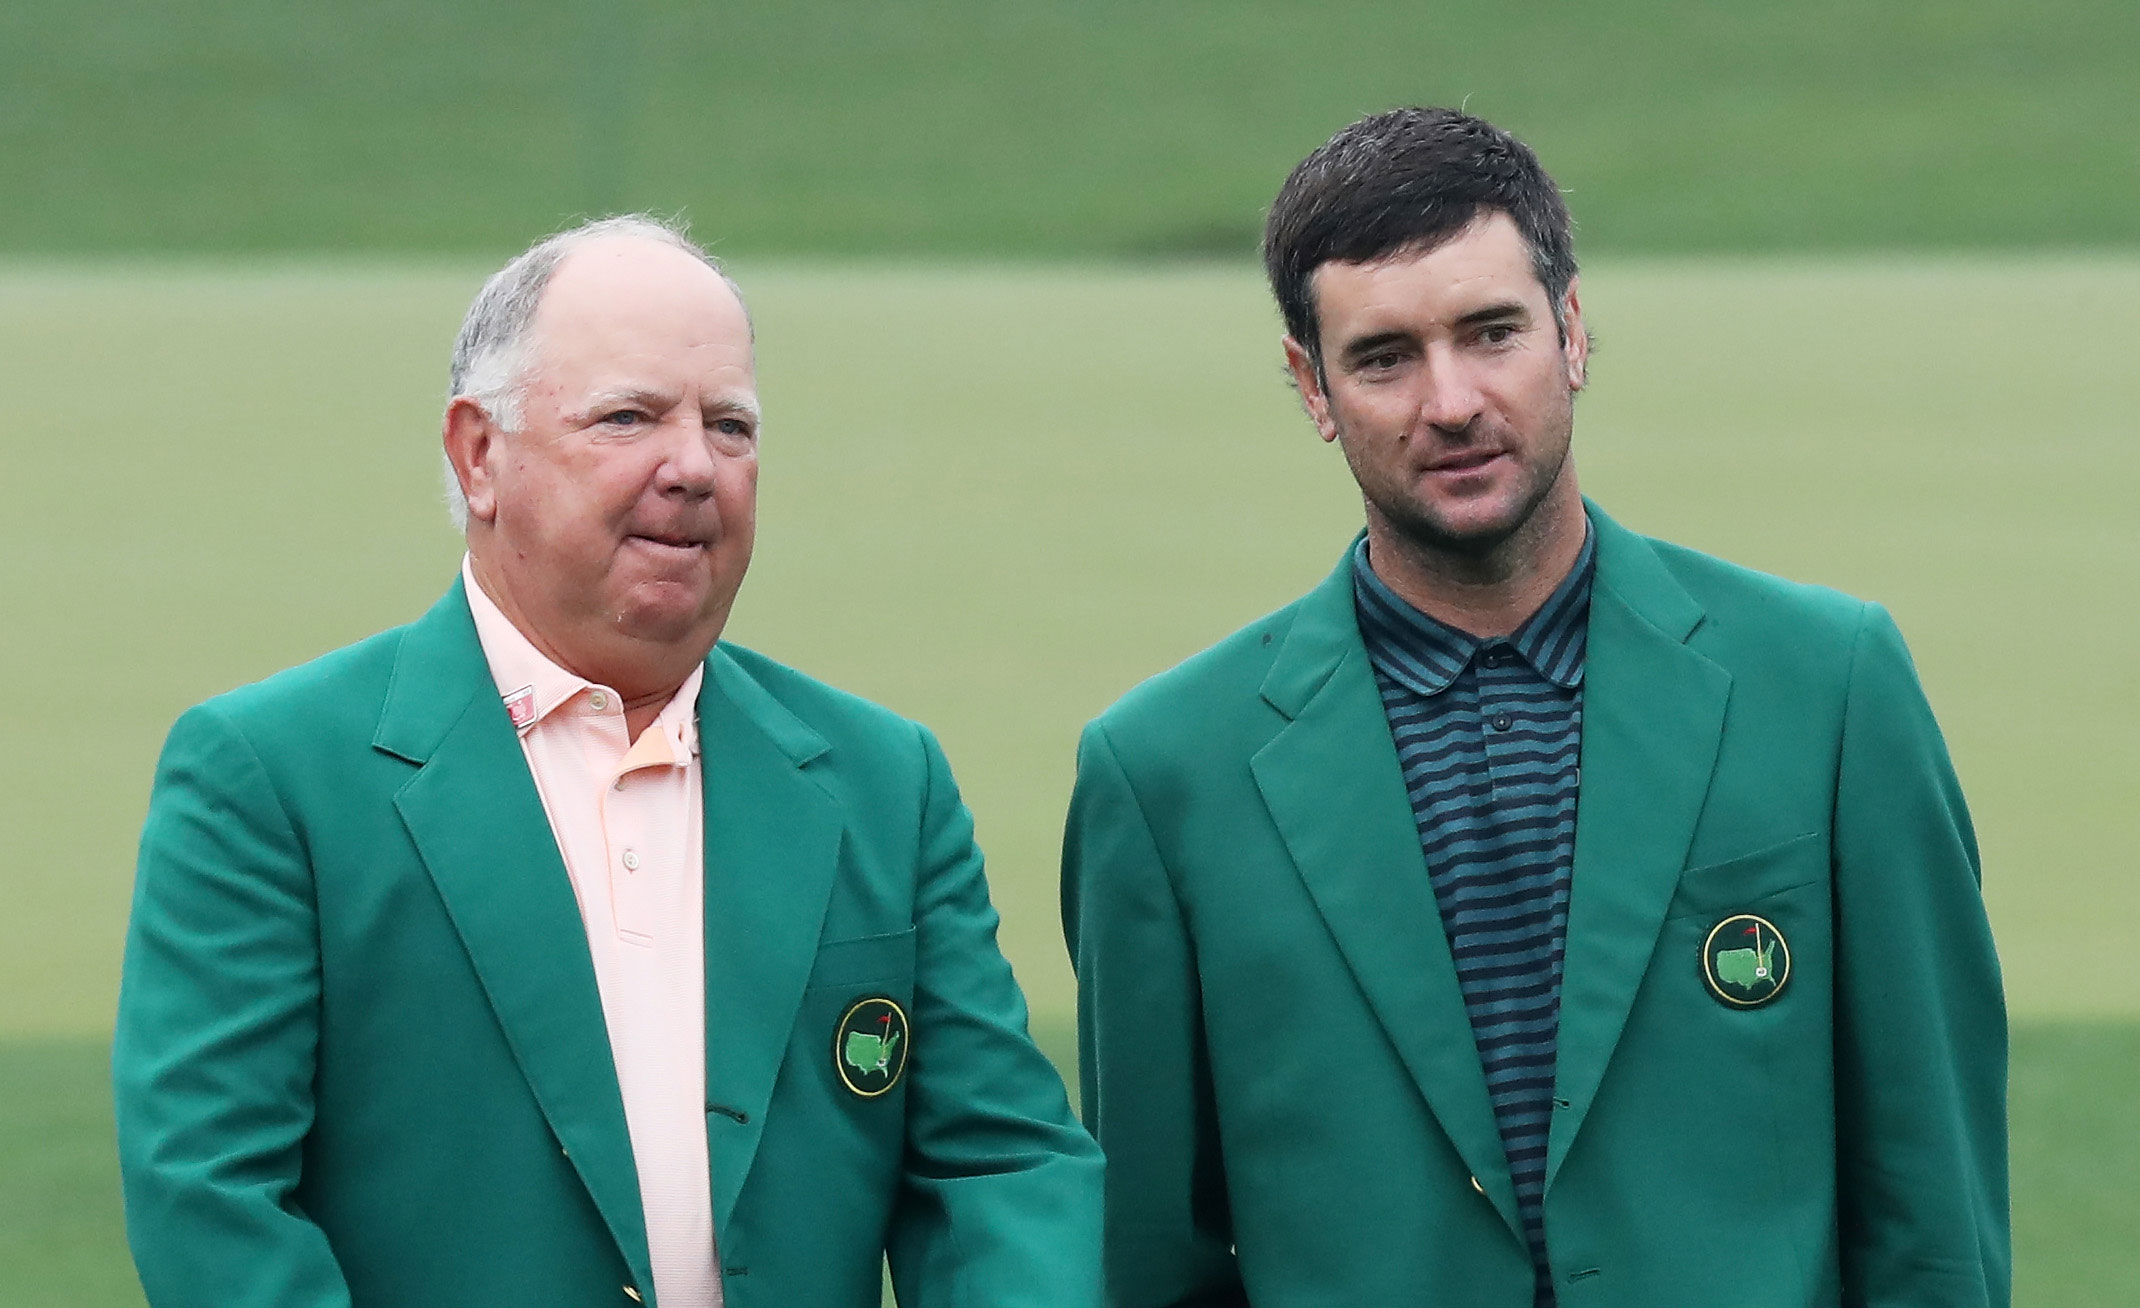 Masters Chairman Fred Ridley happy with tone between LIV, PGA Tour